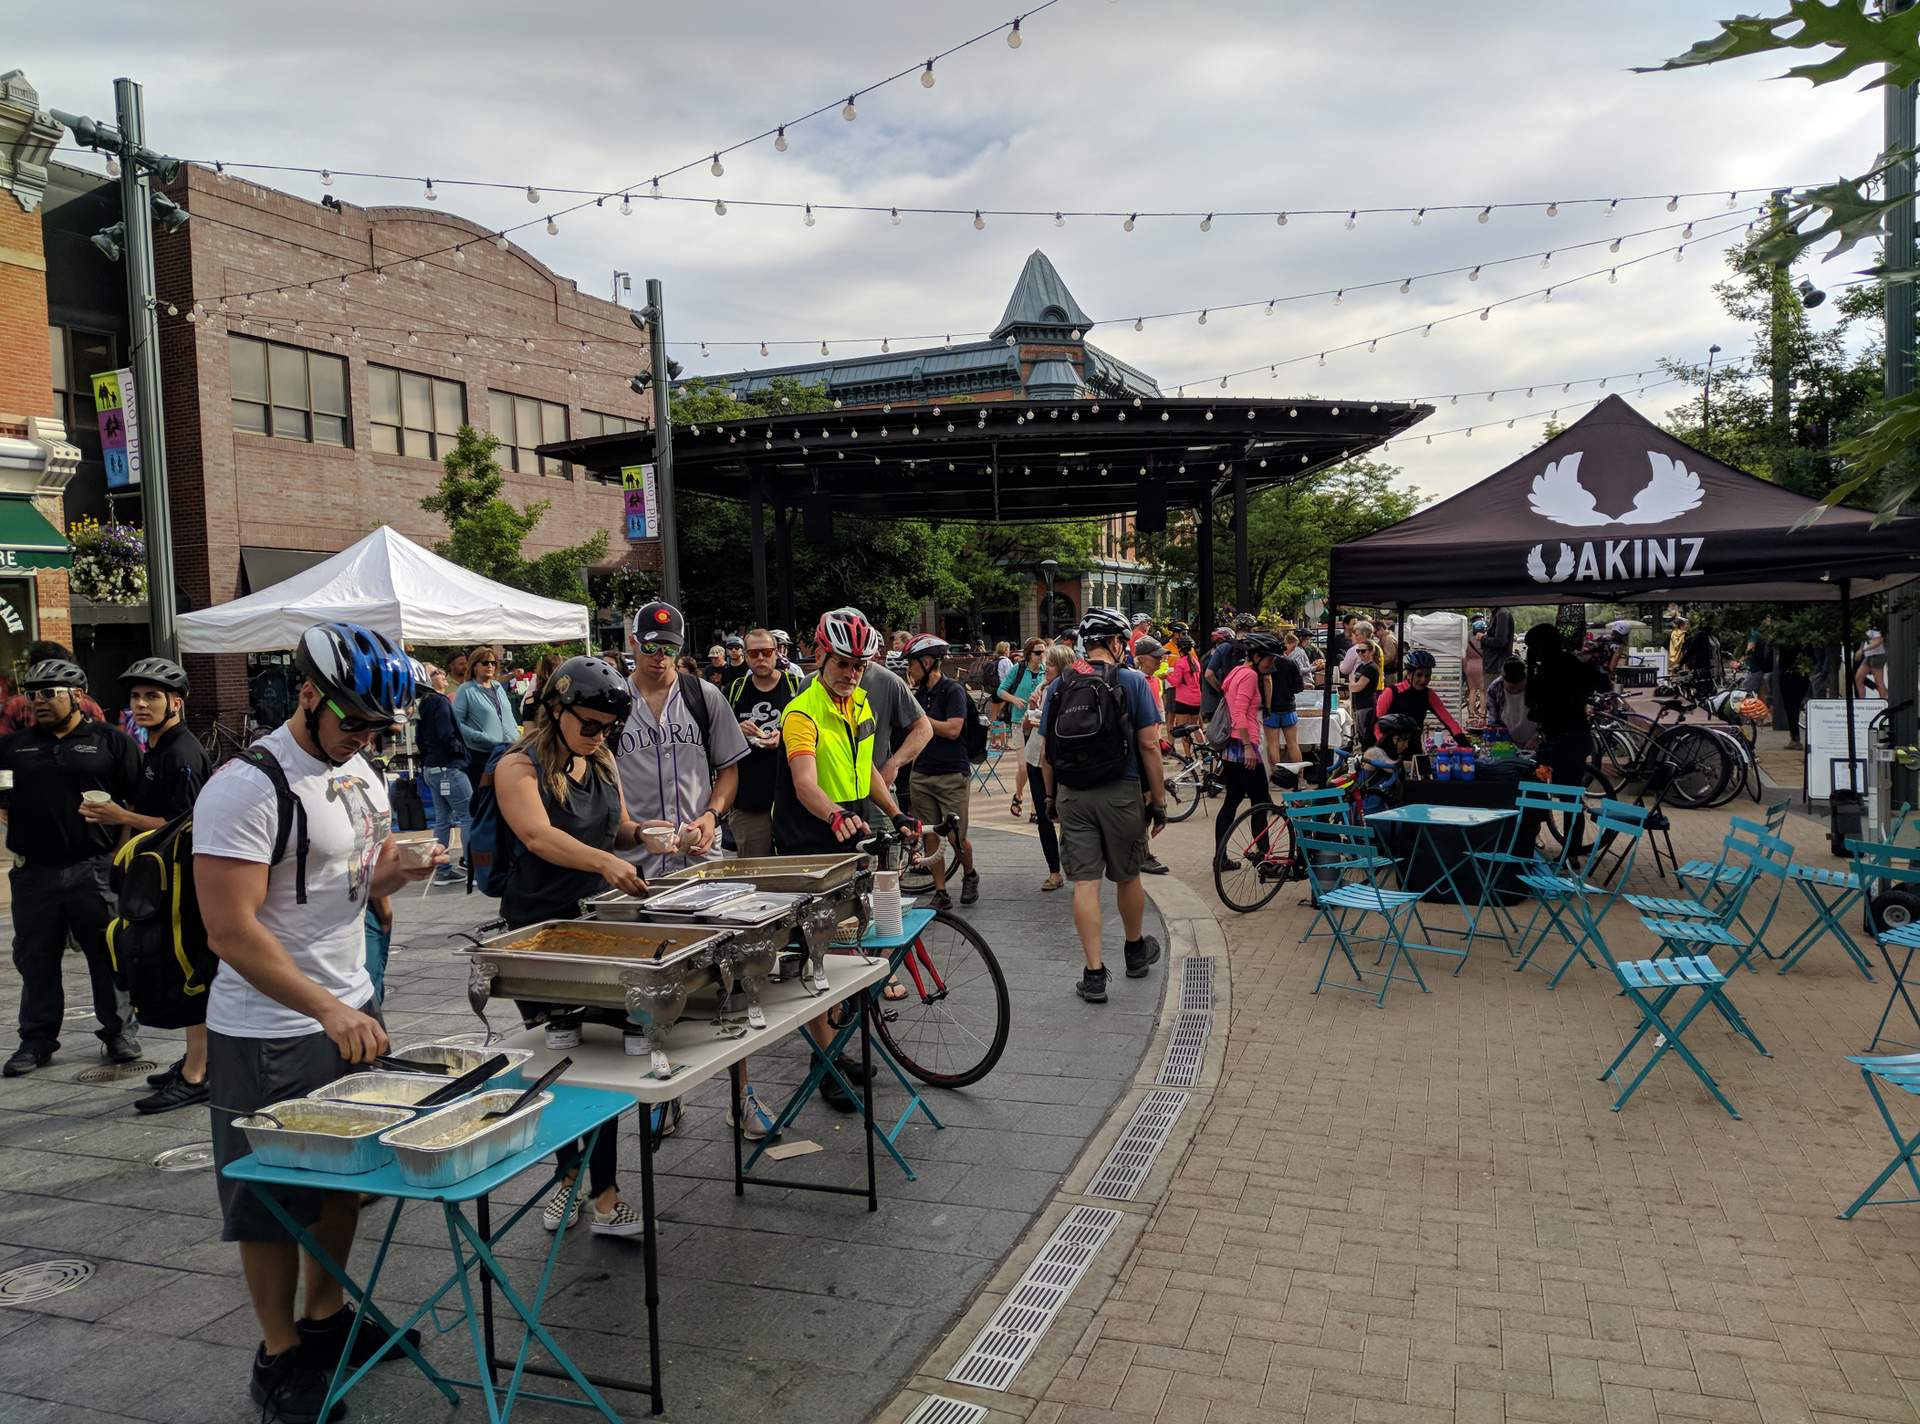 Several businesses were represented in Old Town Square for Bike to Work Day, including casual apparel-maker Akinz.